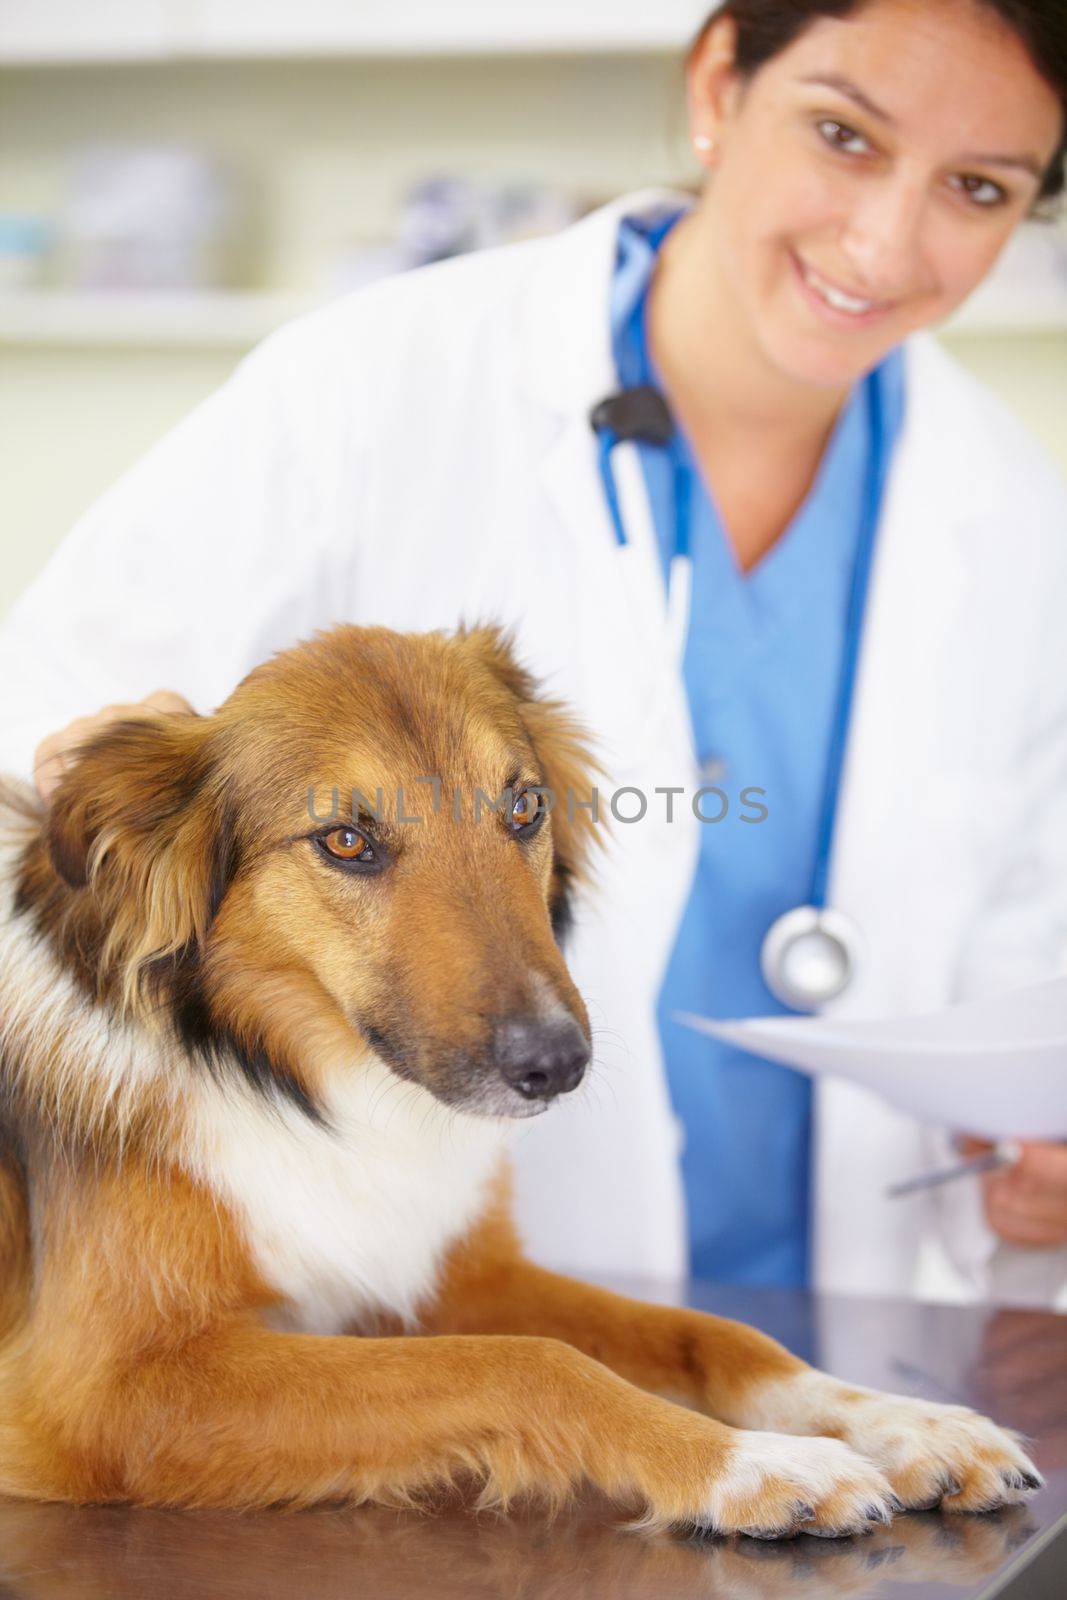 In for a check-up. Portrait of a vet examining a collie lying on an examination table